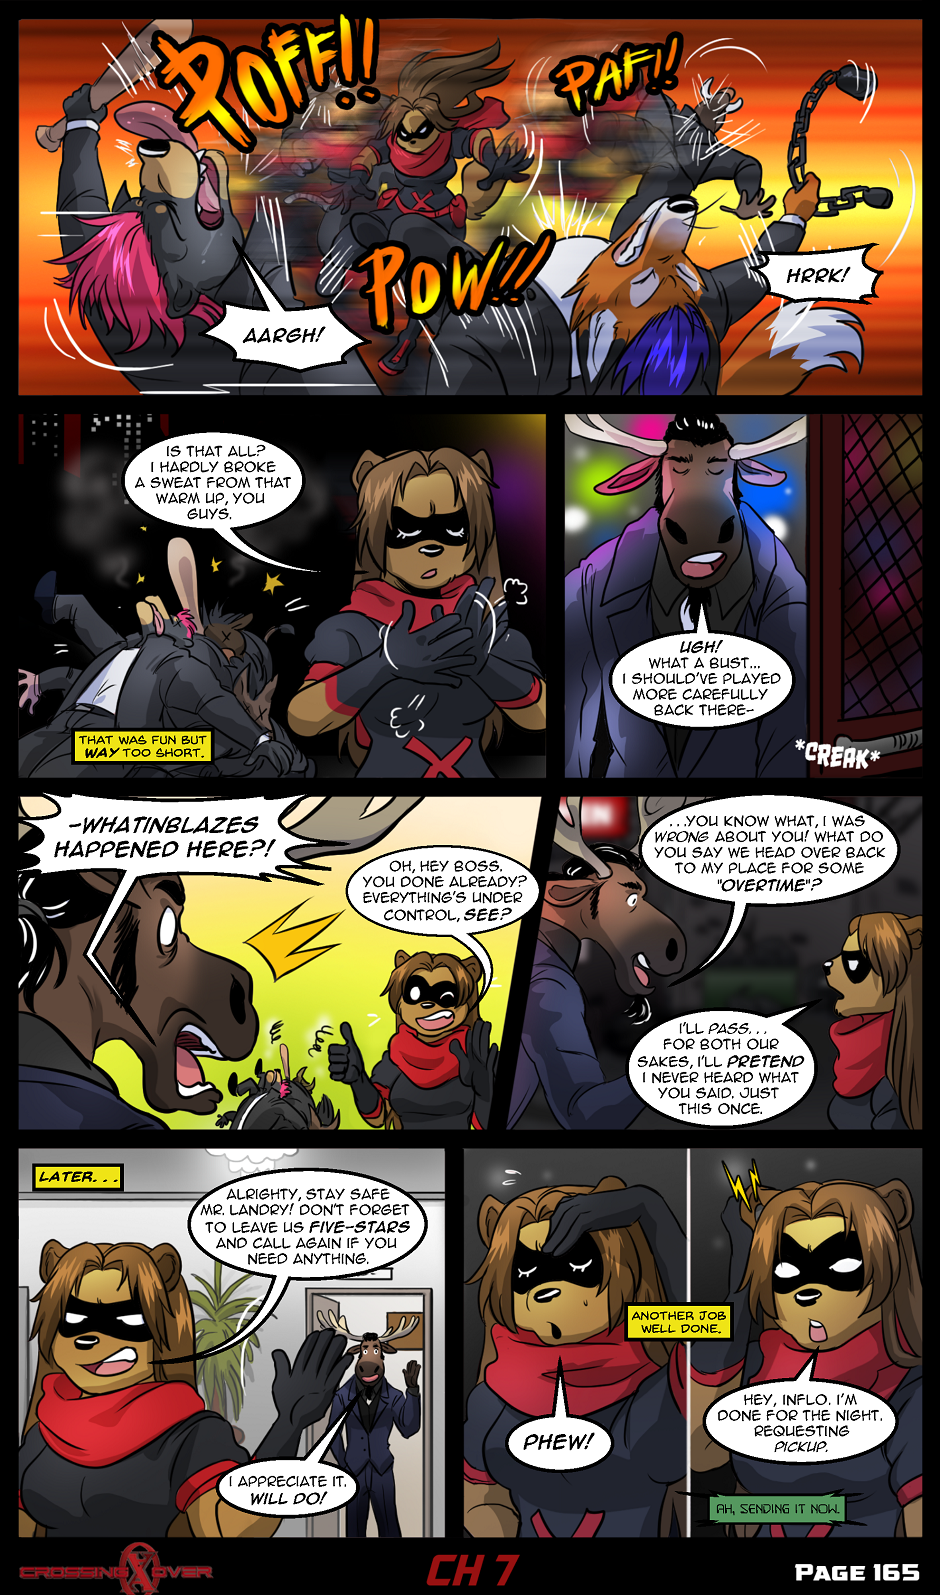 Page 165 (Ch 7)